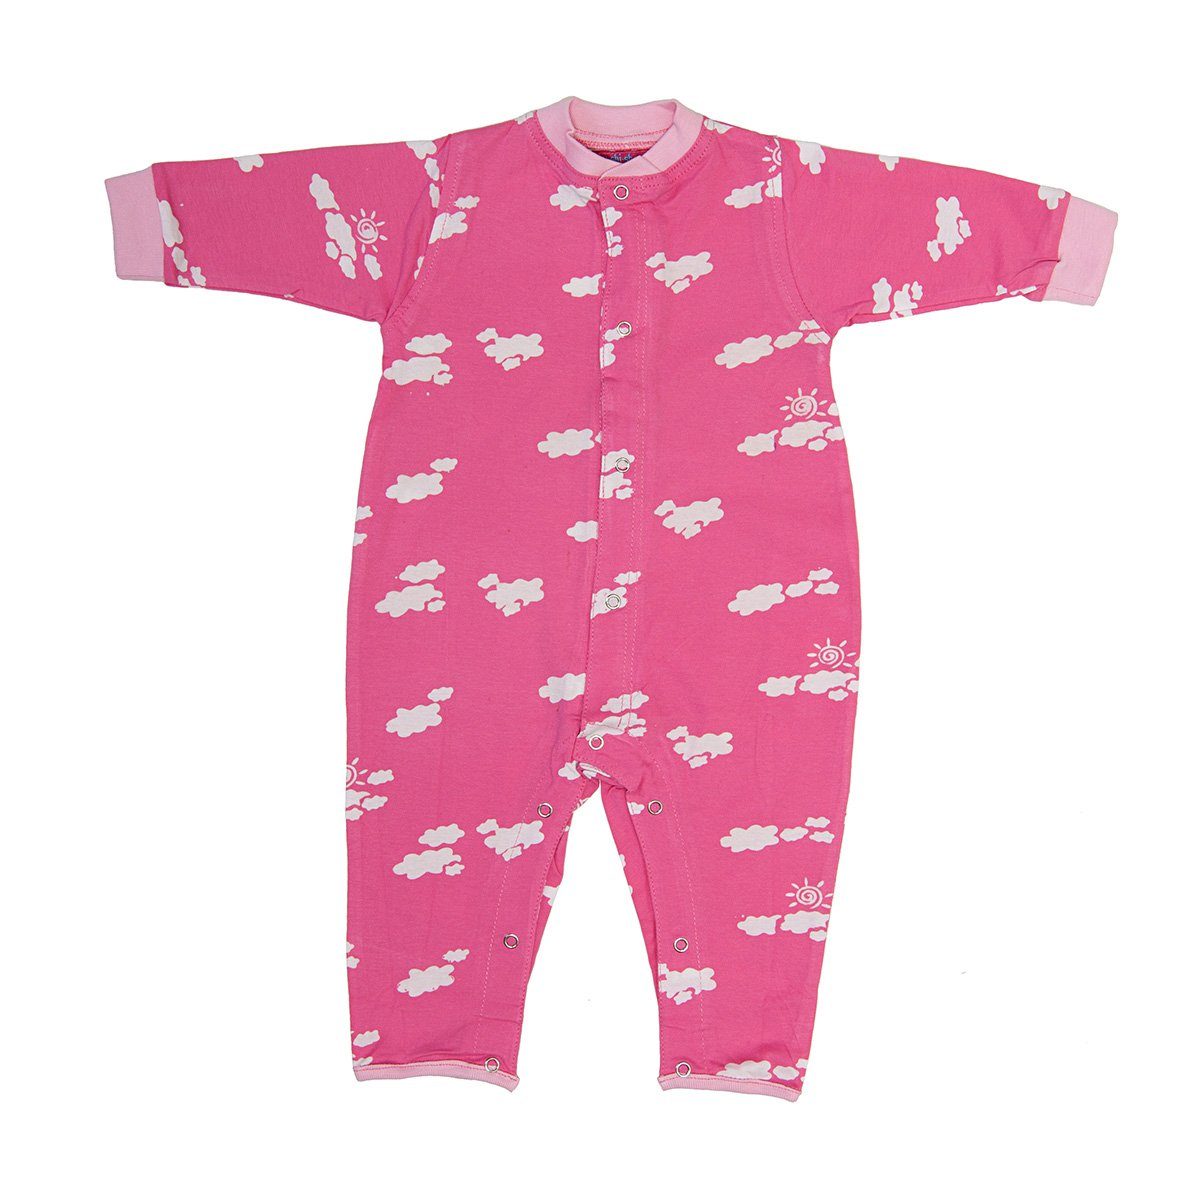 Pink with Clouds Baby Romper One-Piece 100% Cotton Batik Jersey - Love-Shu-Shi